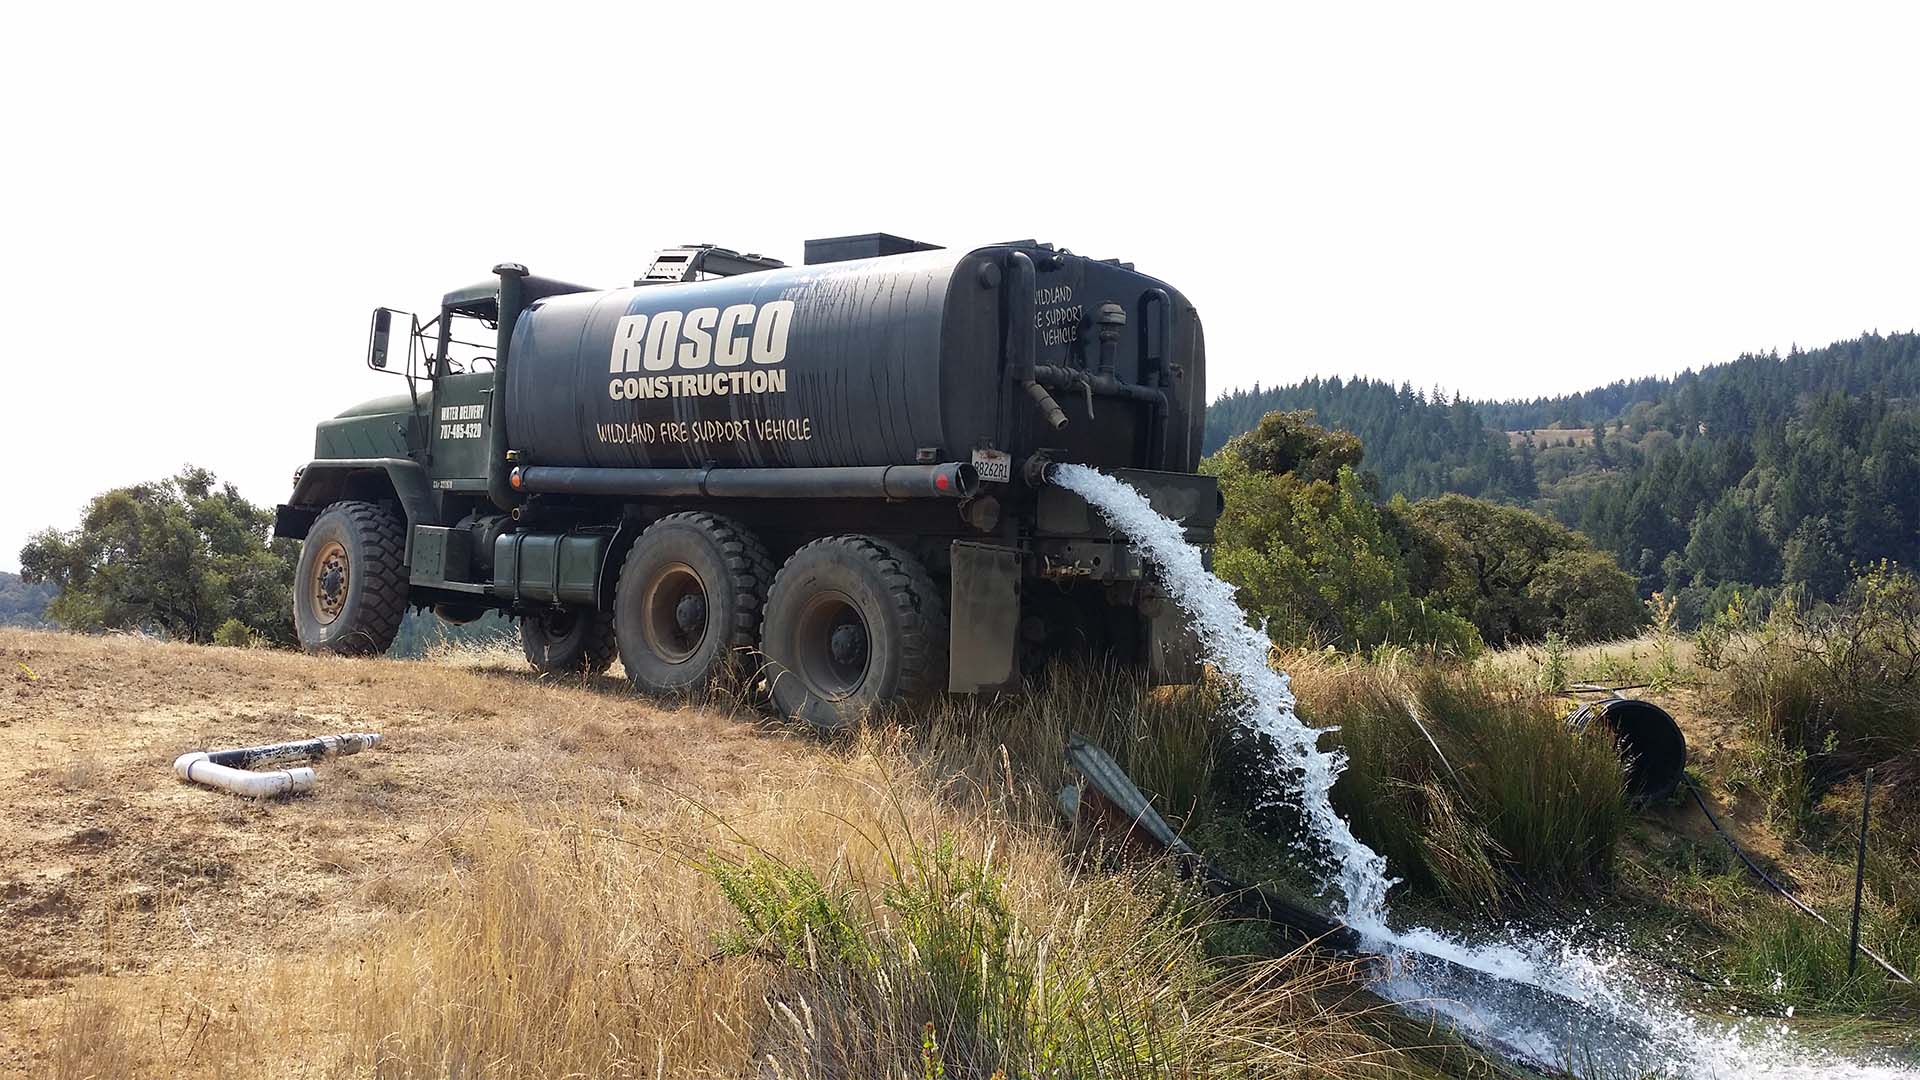 Rosco Water Truck filling a Pond in Northern California